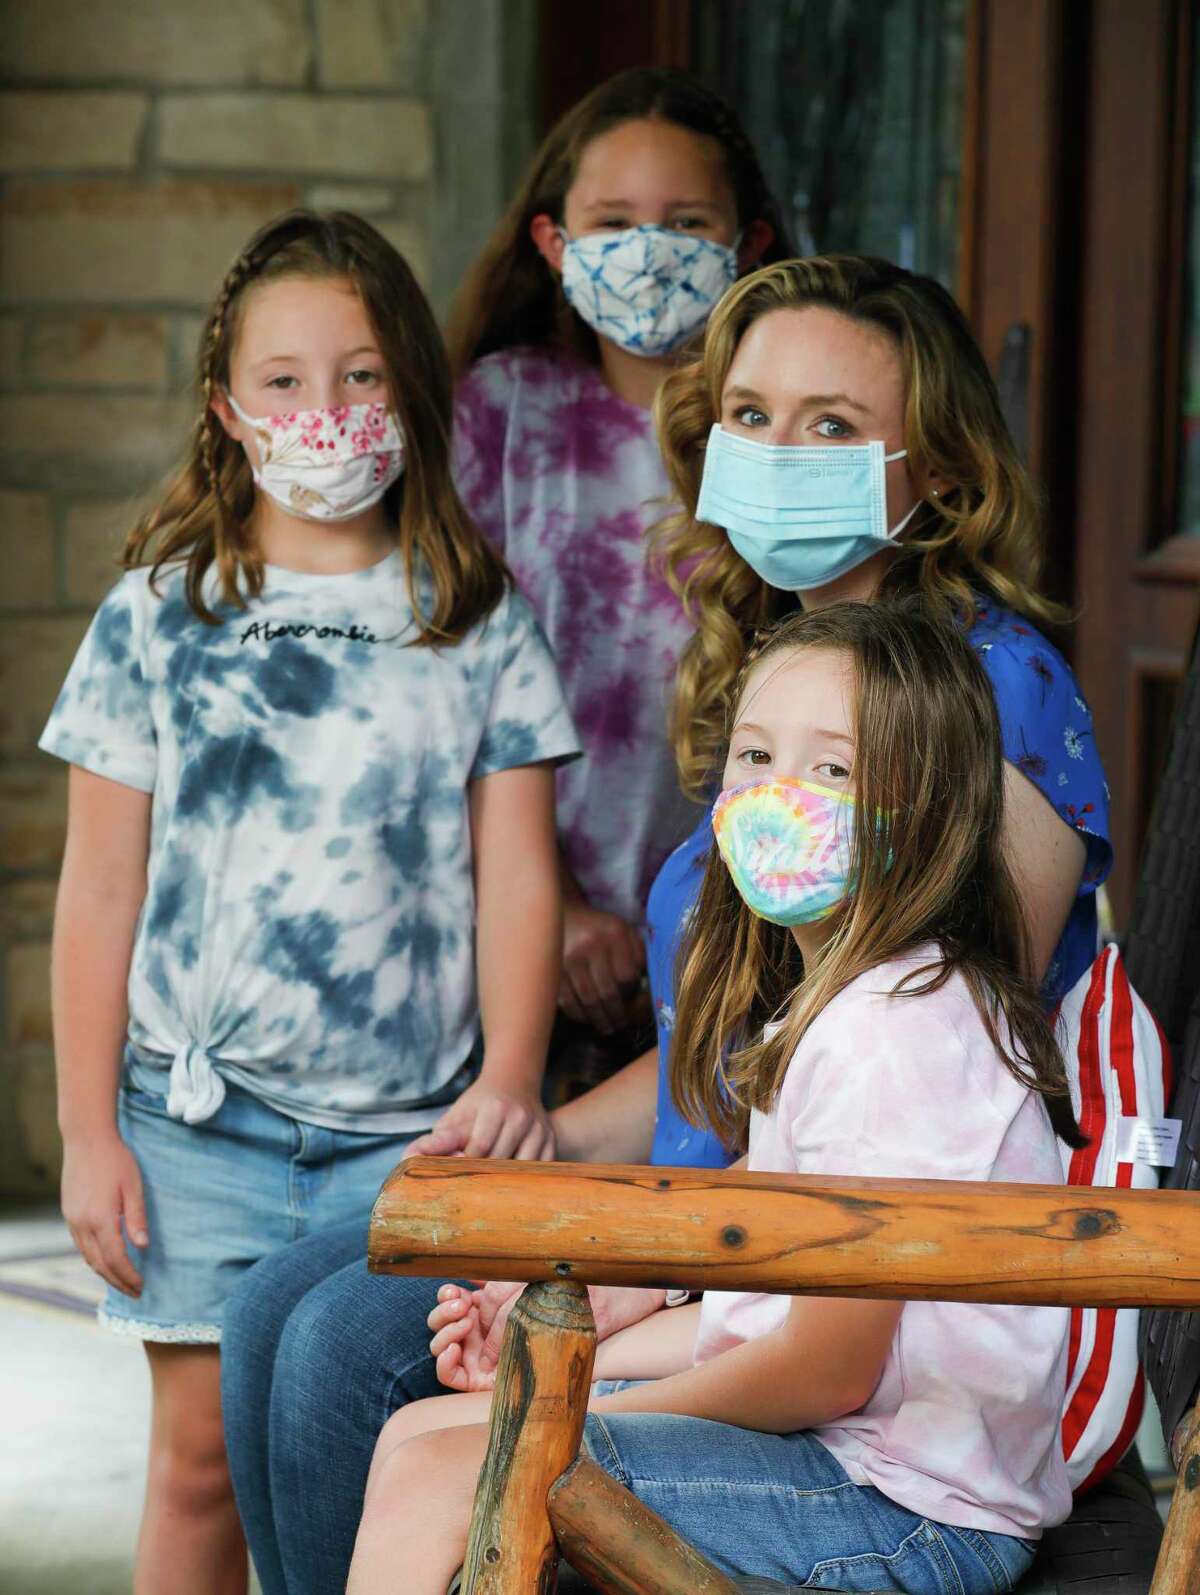 Tricia Danto, second from right, will be applying for the newly announced limited virtual program for her daughters, Lucy, top, Ellie, left, and Abbie to attend this school year. Tricia, along with her seven-year-old daughter are both immunocompromised, is concerned about the family’s safety as in-person school begins.